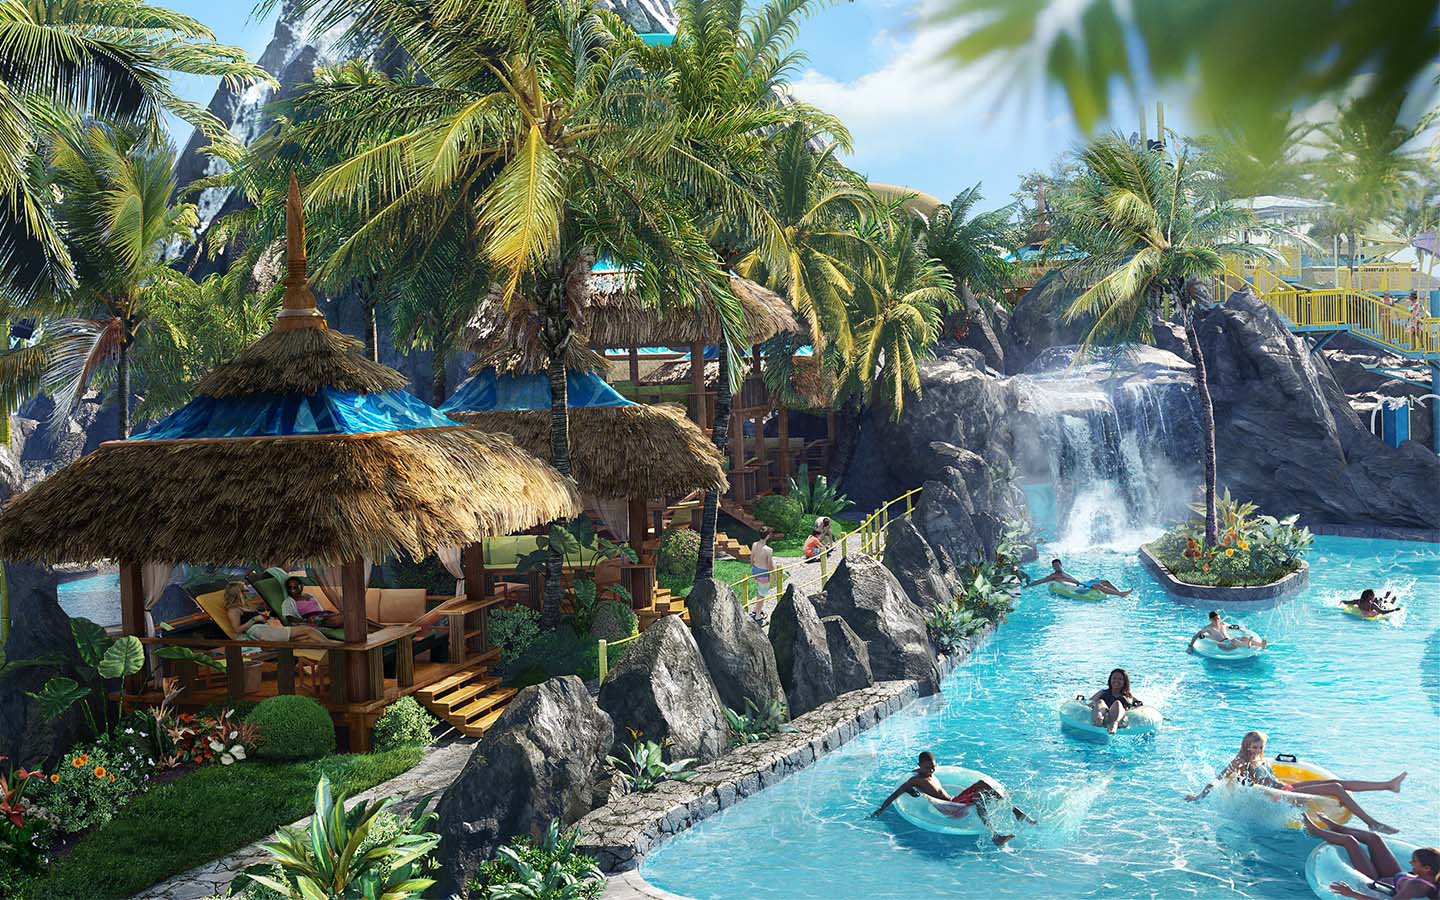 First-ever details revealed for Universal's Volcano Bay, including Kopiko Wai Winding River - a gentle, winding river that passes through the volcano’s hidden caves, featuring spontaneous water effects and special nighttime lighting.